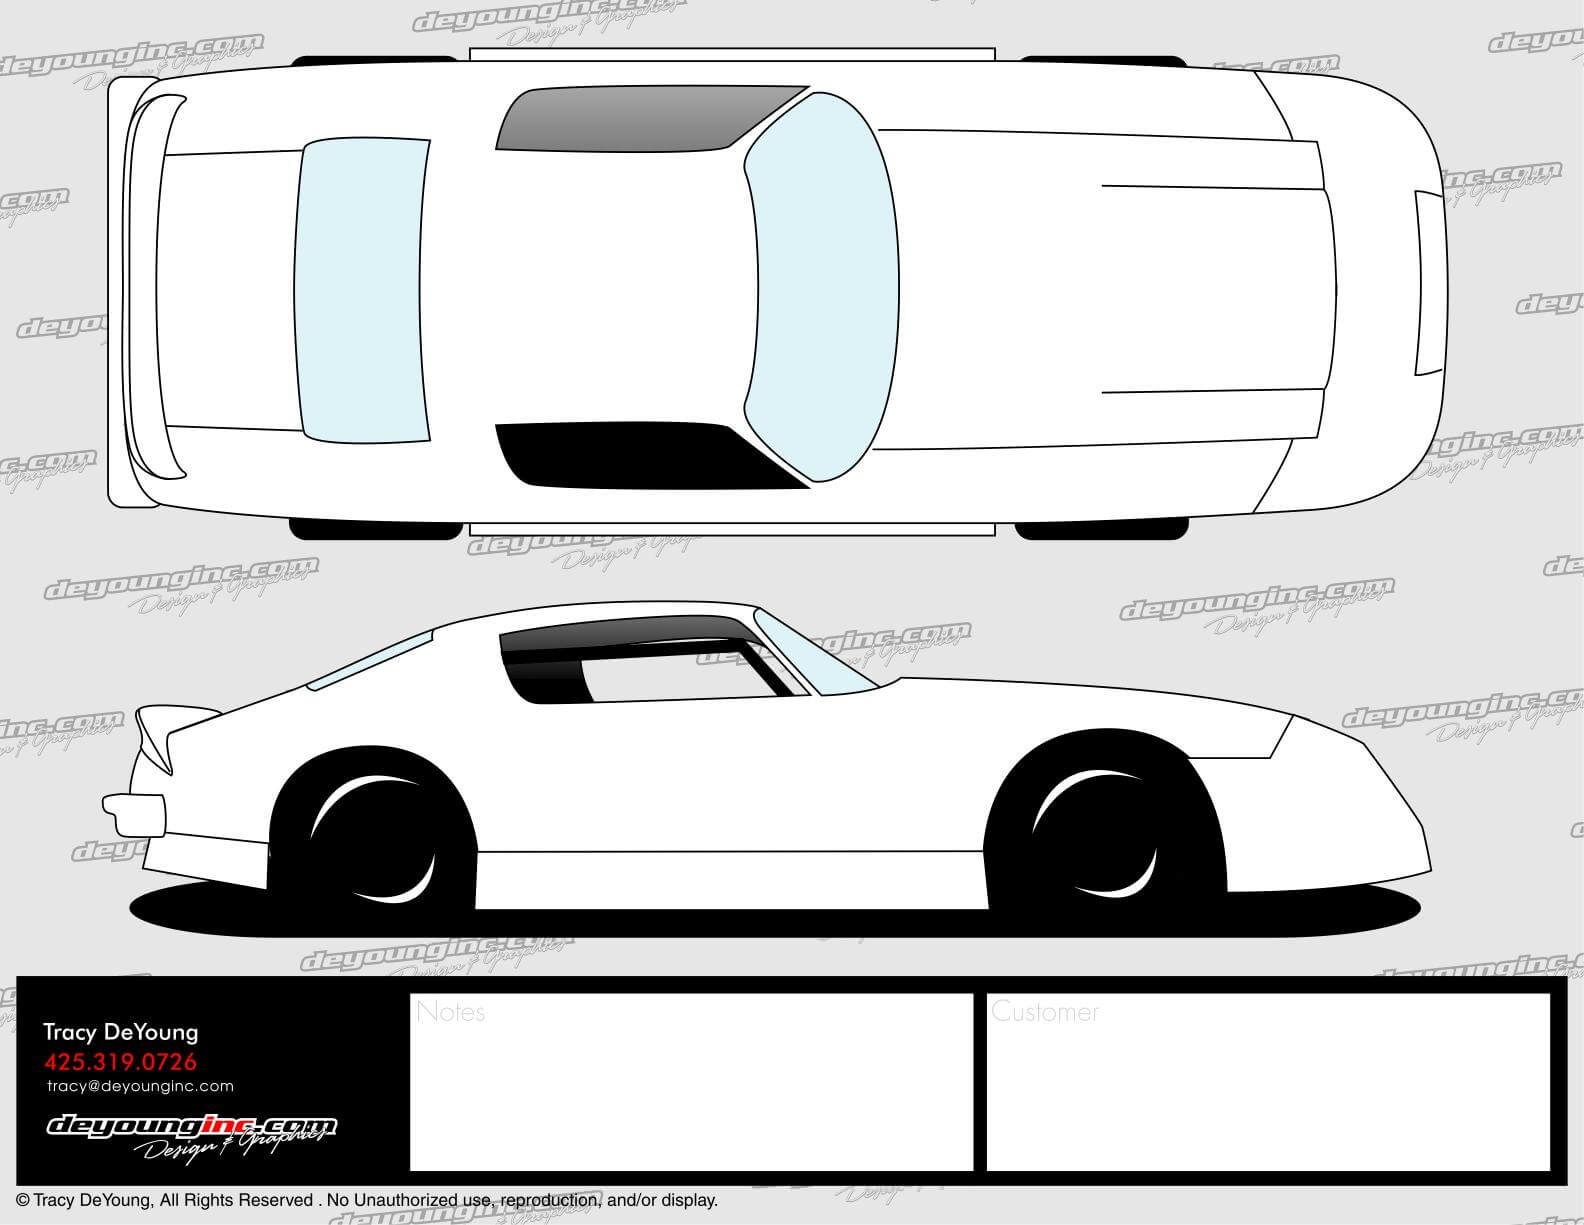 Deyounginc – Motorsports Packages For Blank Race Car Templates